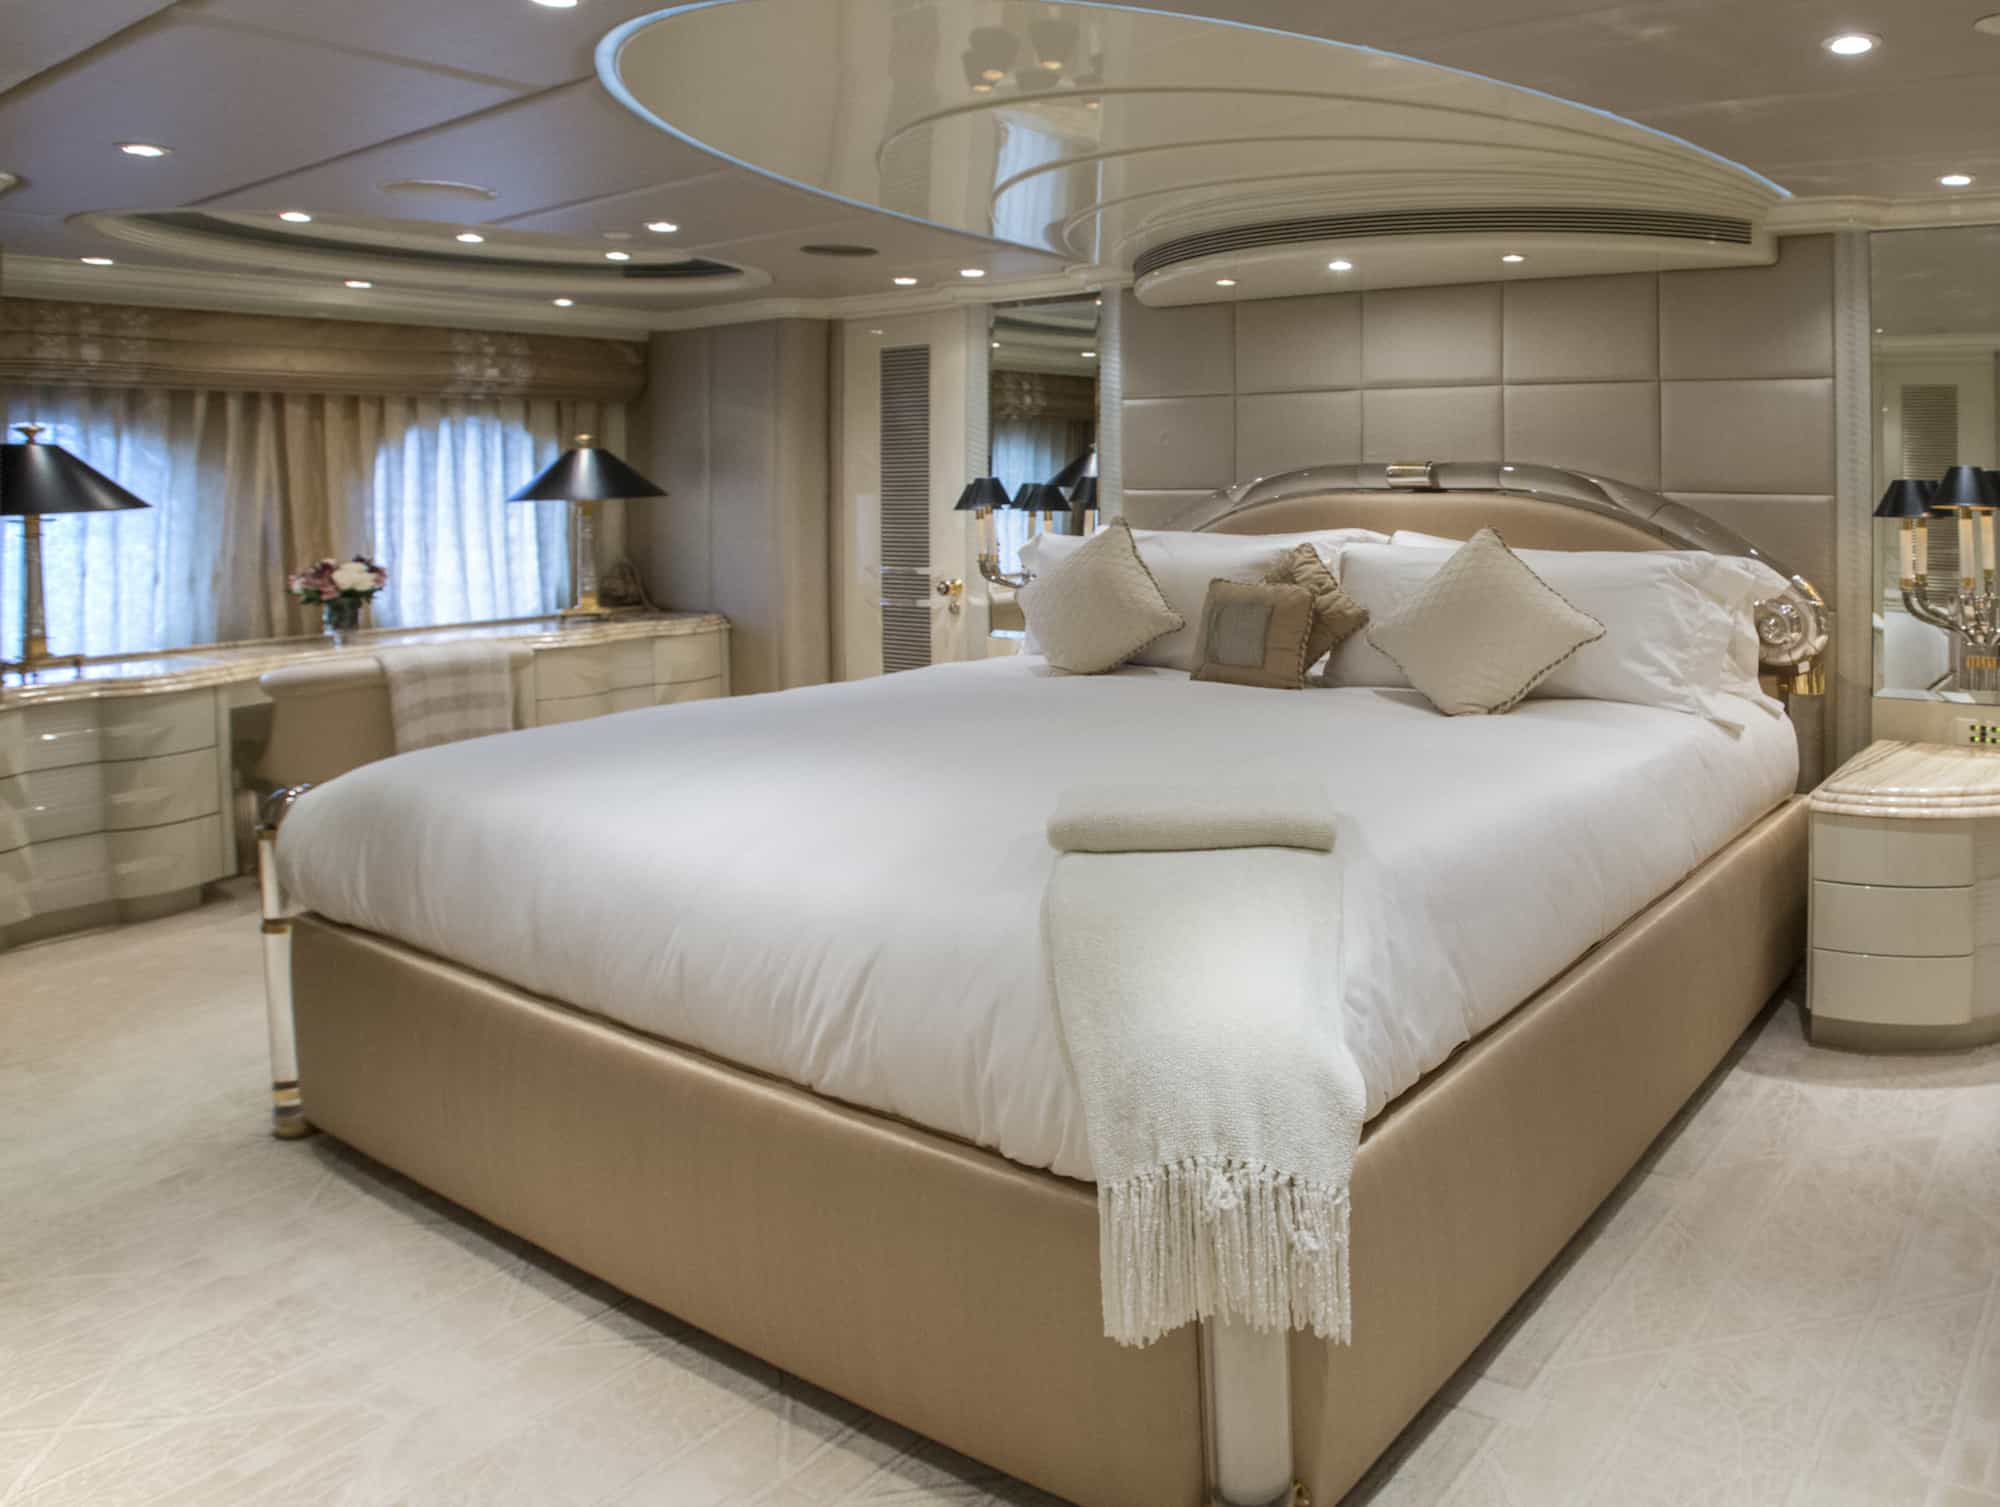 master bedroom suite onboard a luxury yacht complete with cream and white furnishings